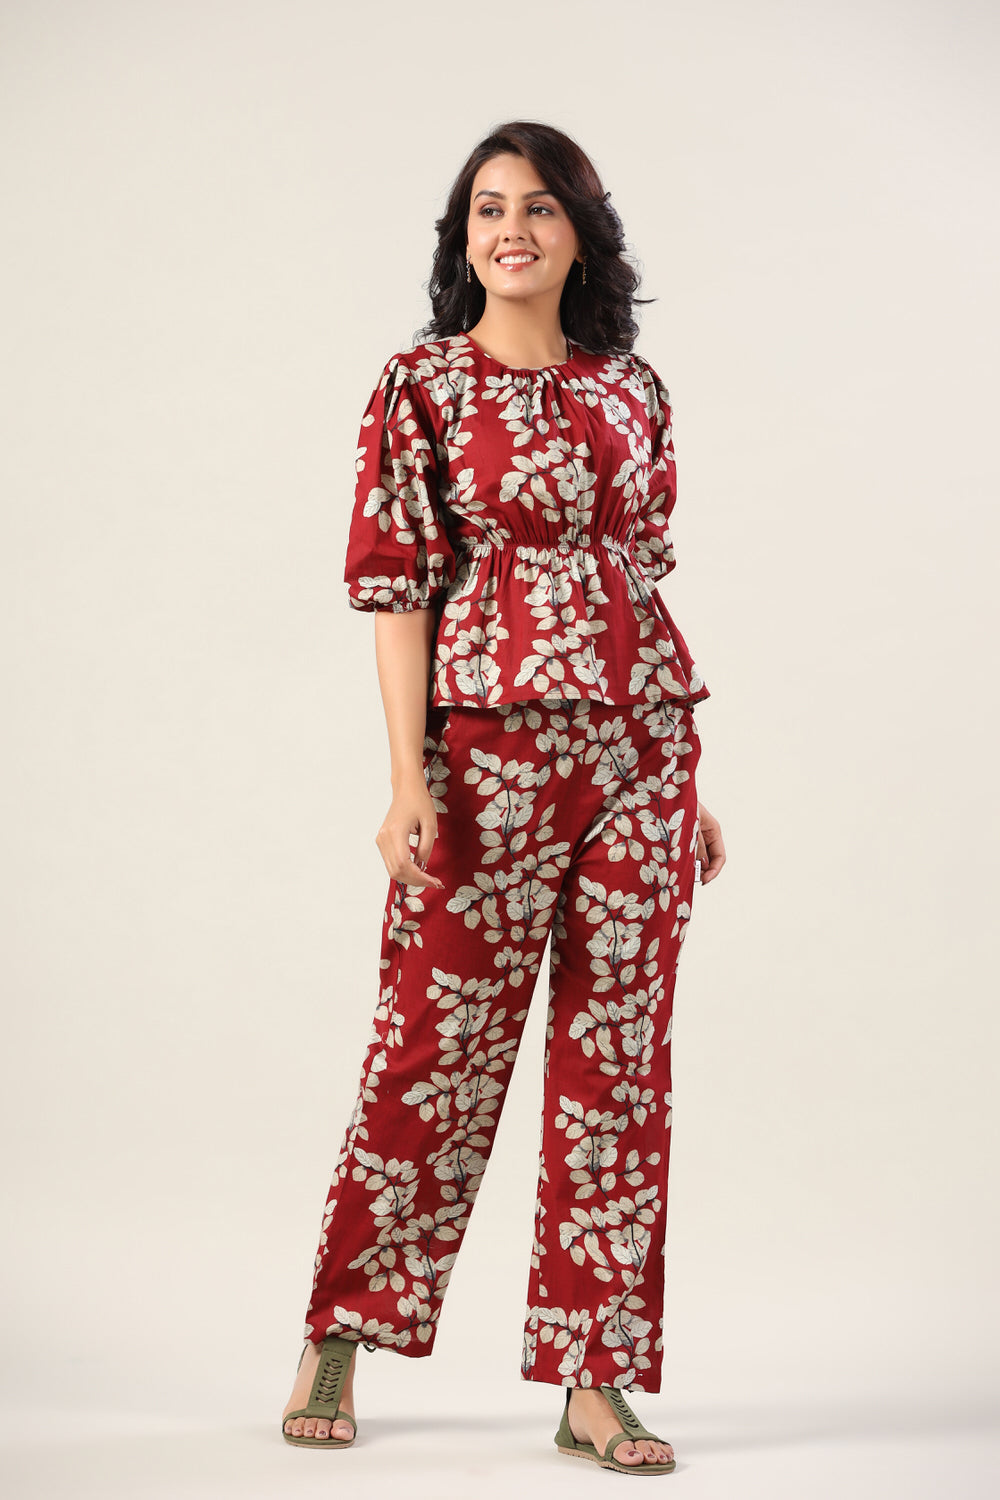 Autumn Leaves on Red Co-ord Set